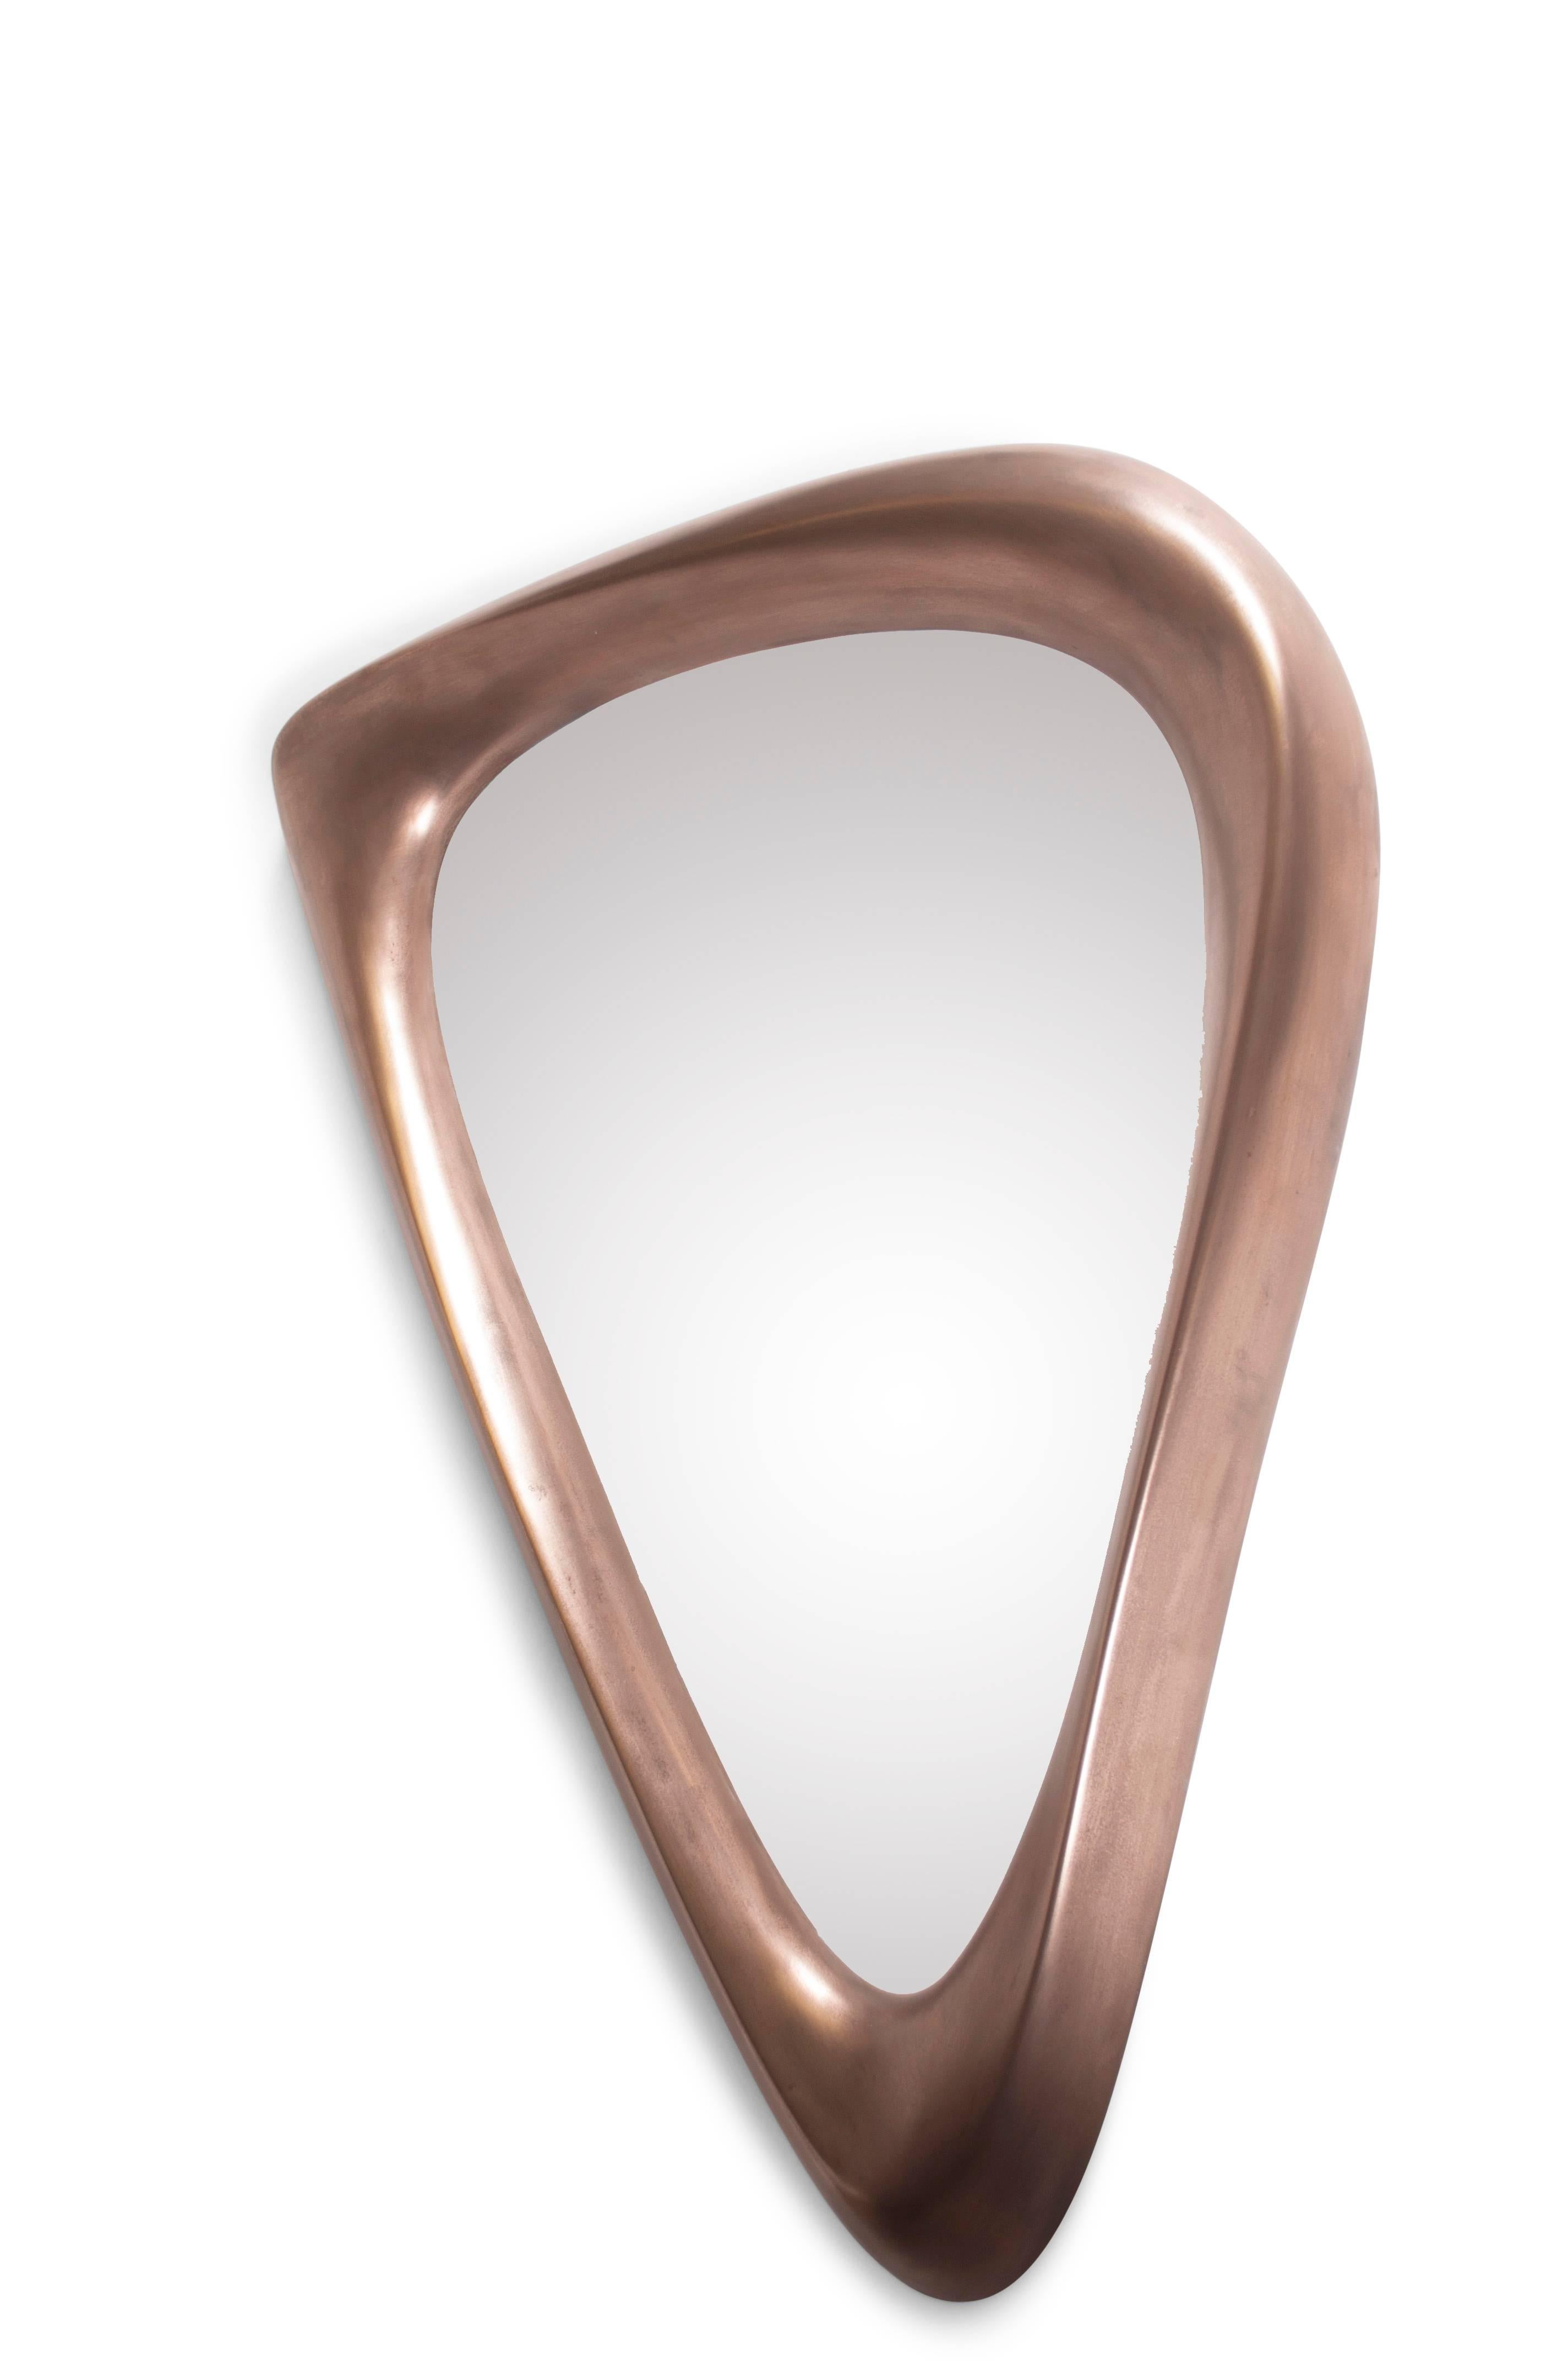 Triangular shaped mirror with bronze finish, designed and manufactured by Amorph.
Mirror thickness 1/4